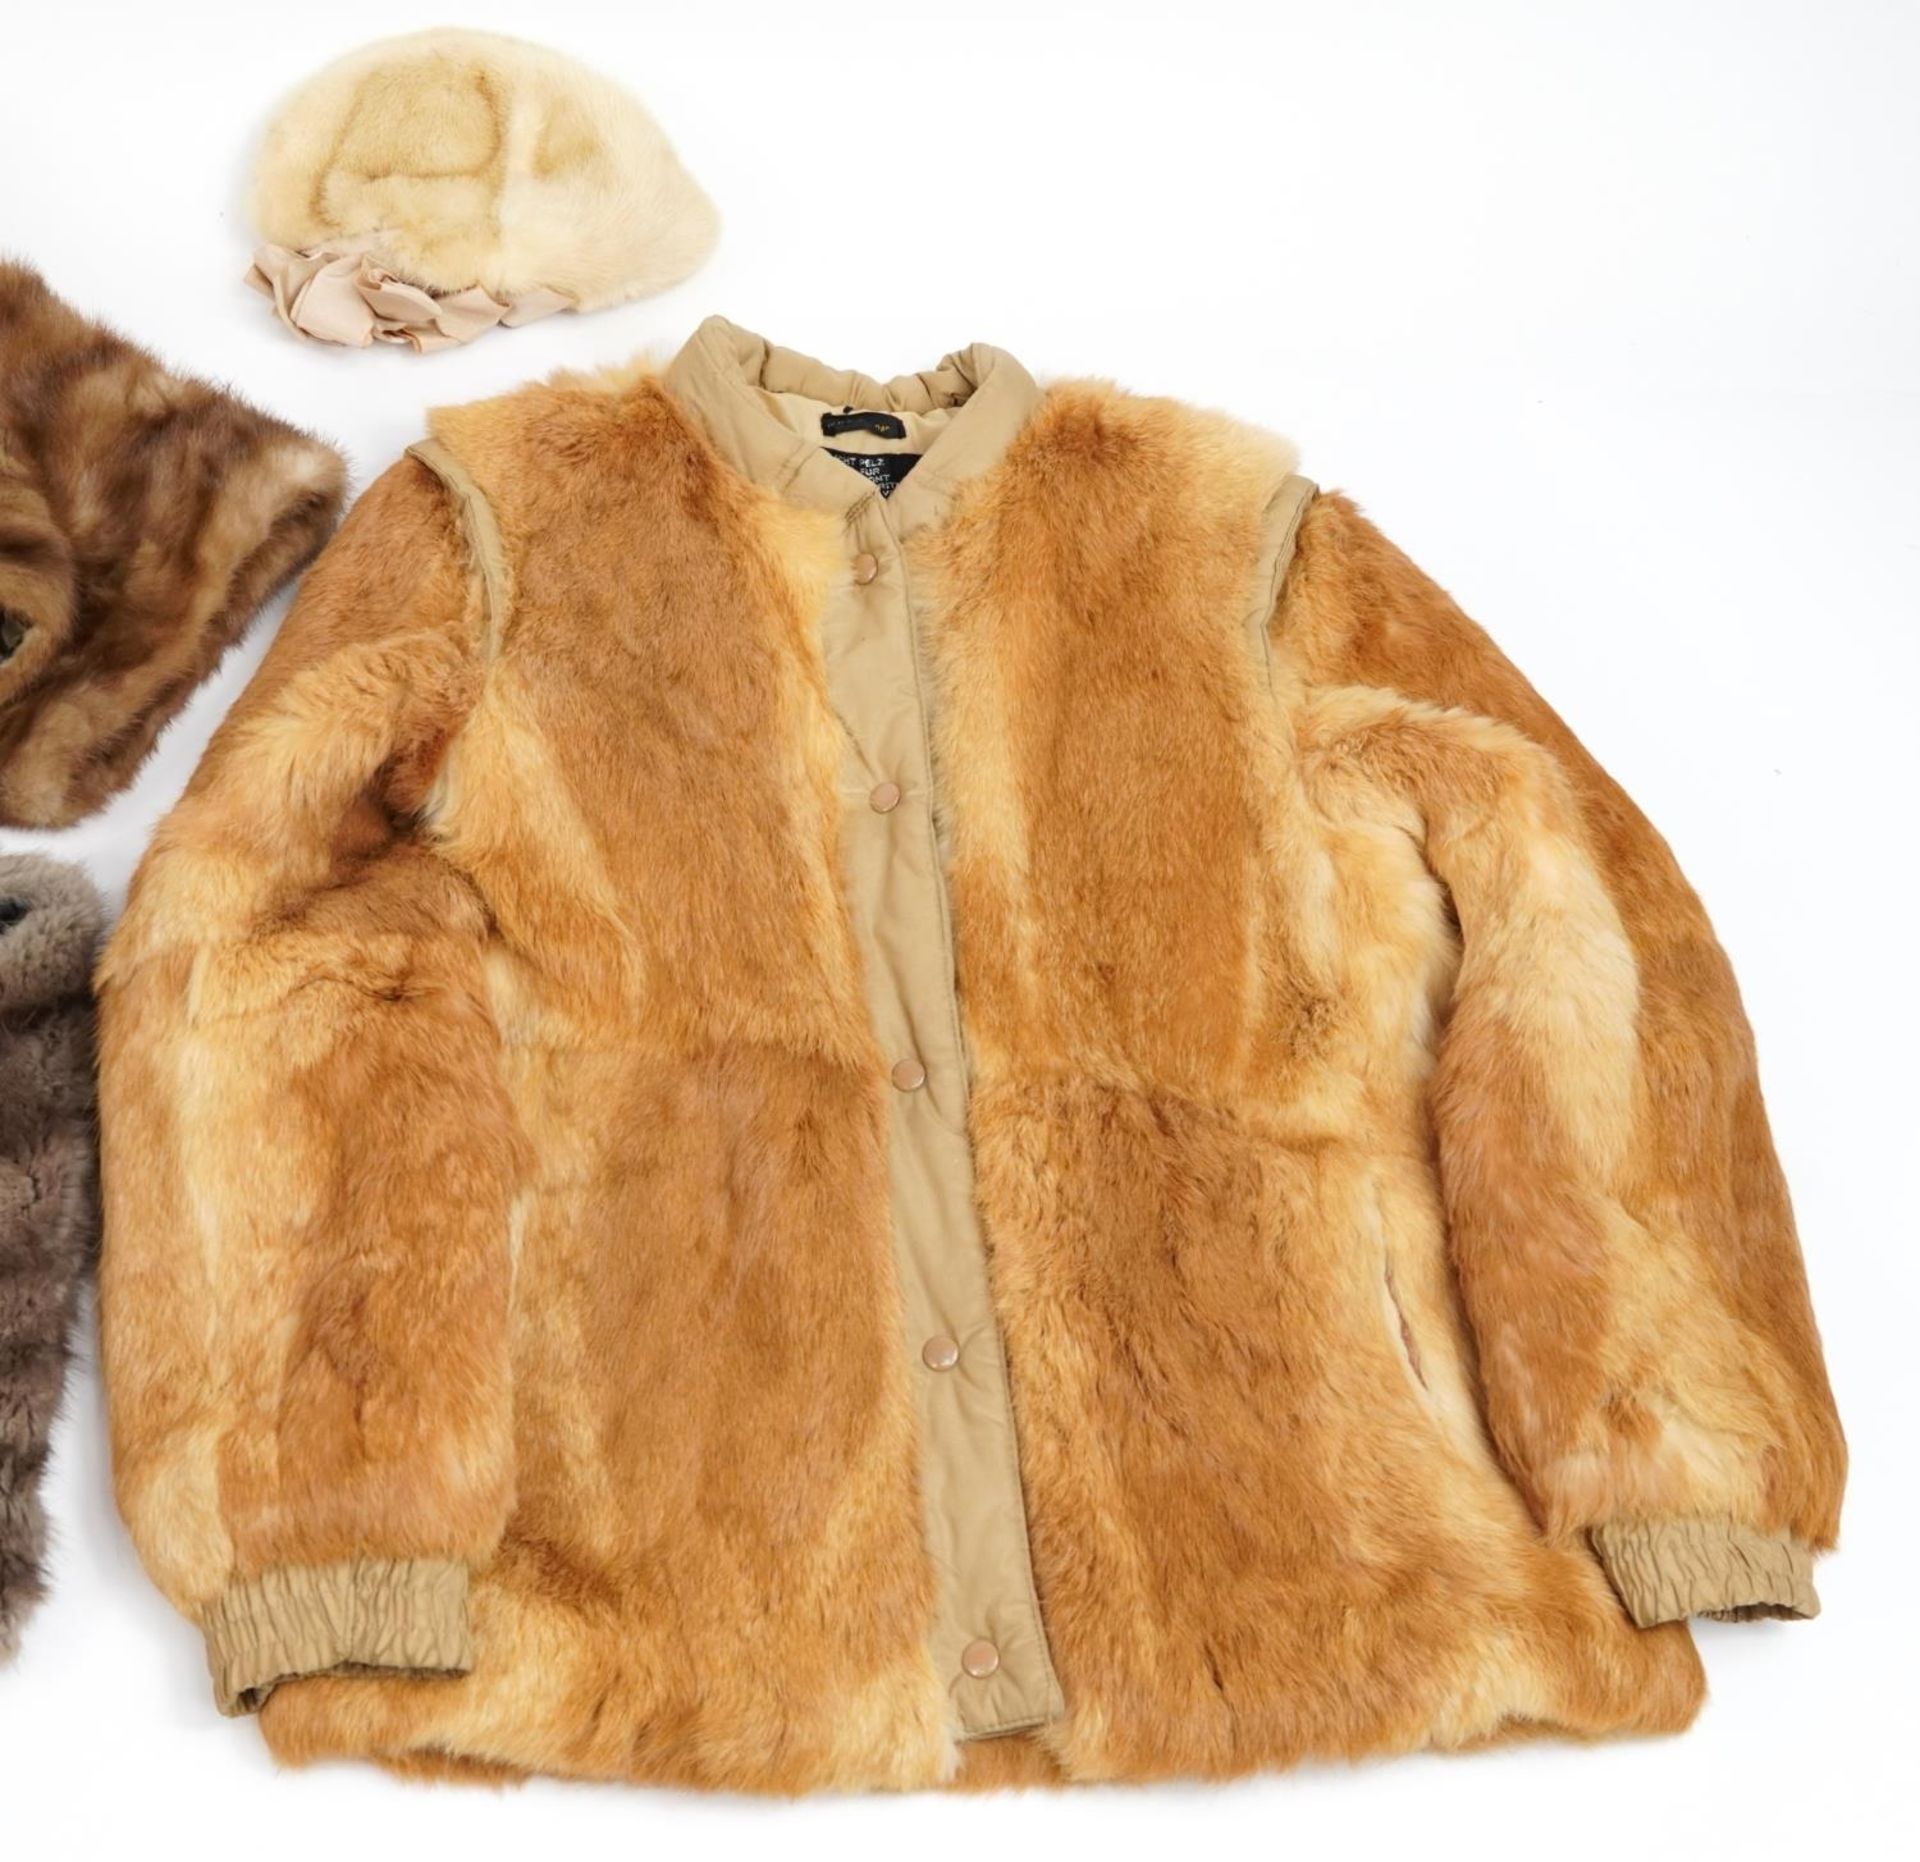 Collection of fur jackets, stoles and hats including a French rabbit fur jacket - Image 4 of 5